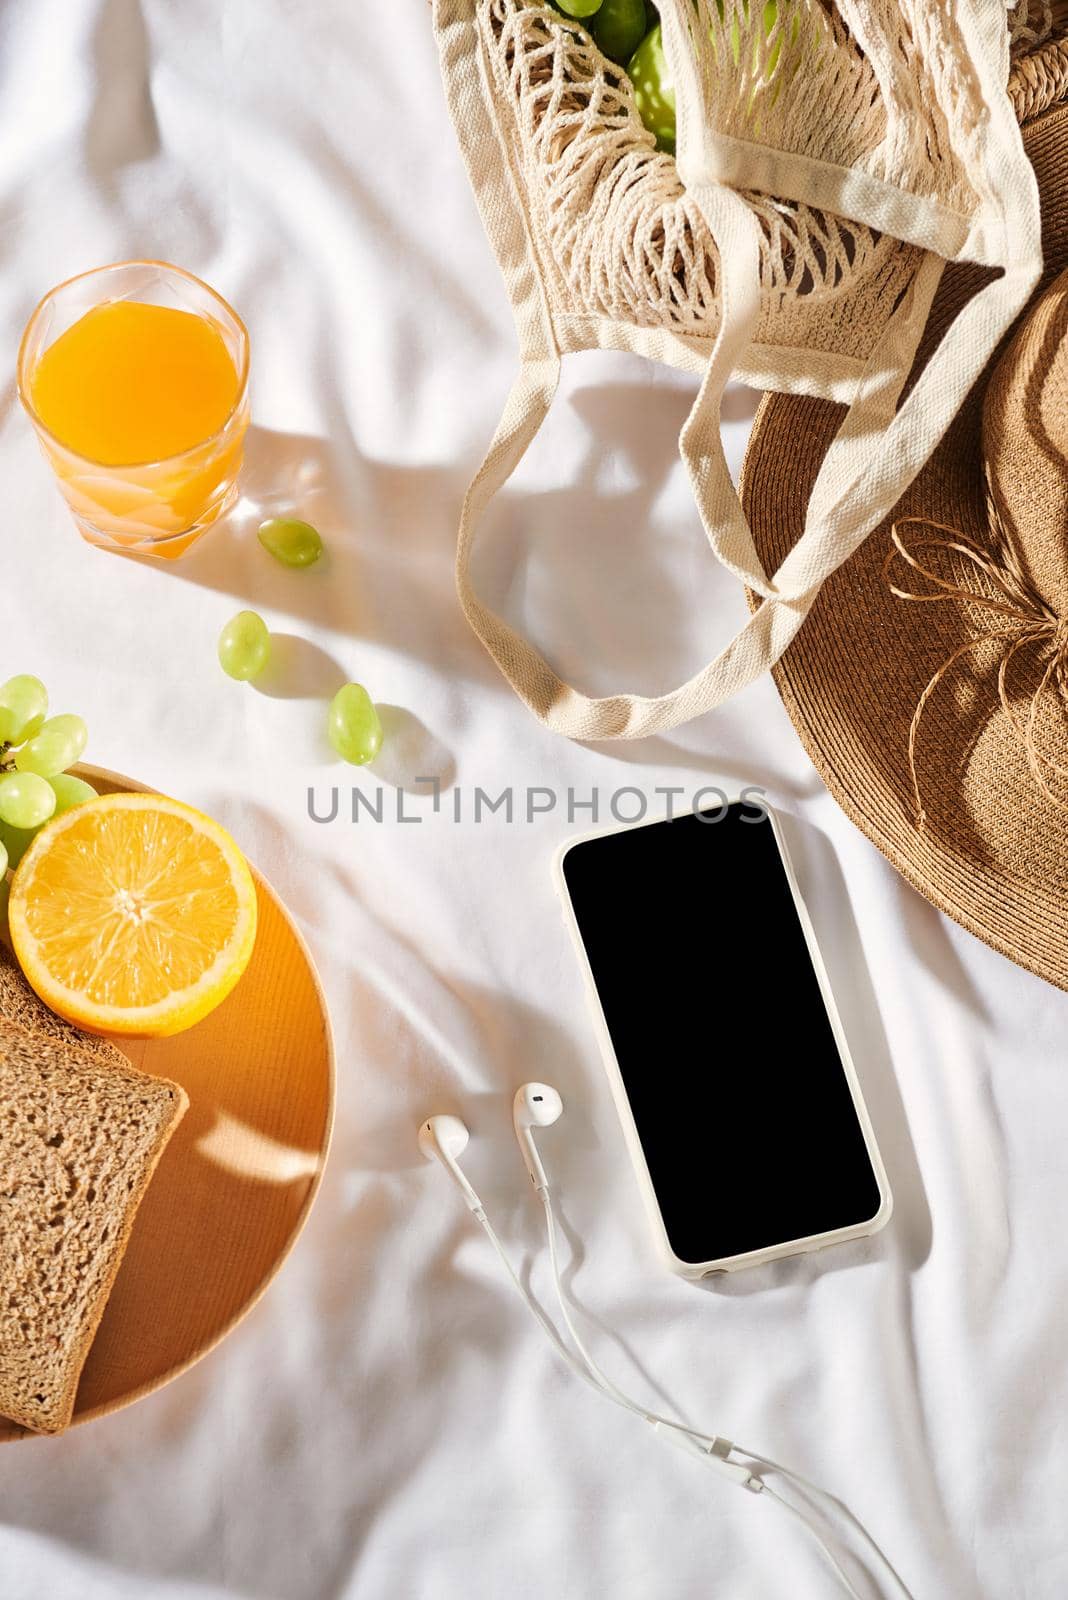 Picnic background with bag, bread and straw hat, glasses, orange juice, phone on white background. by makidotvn